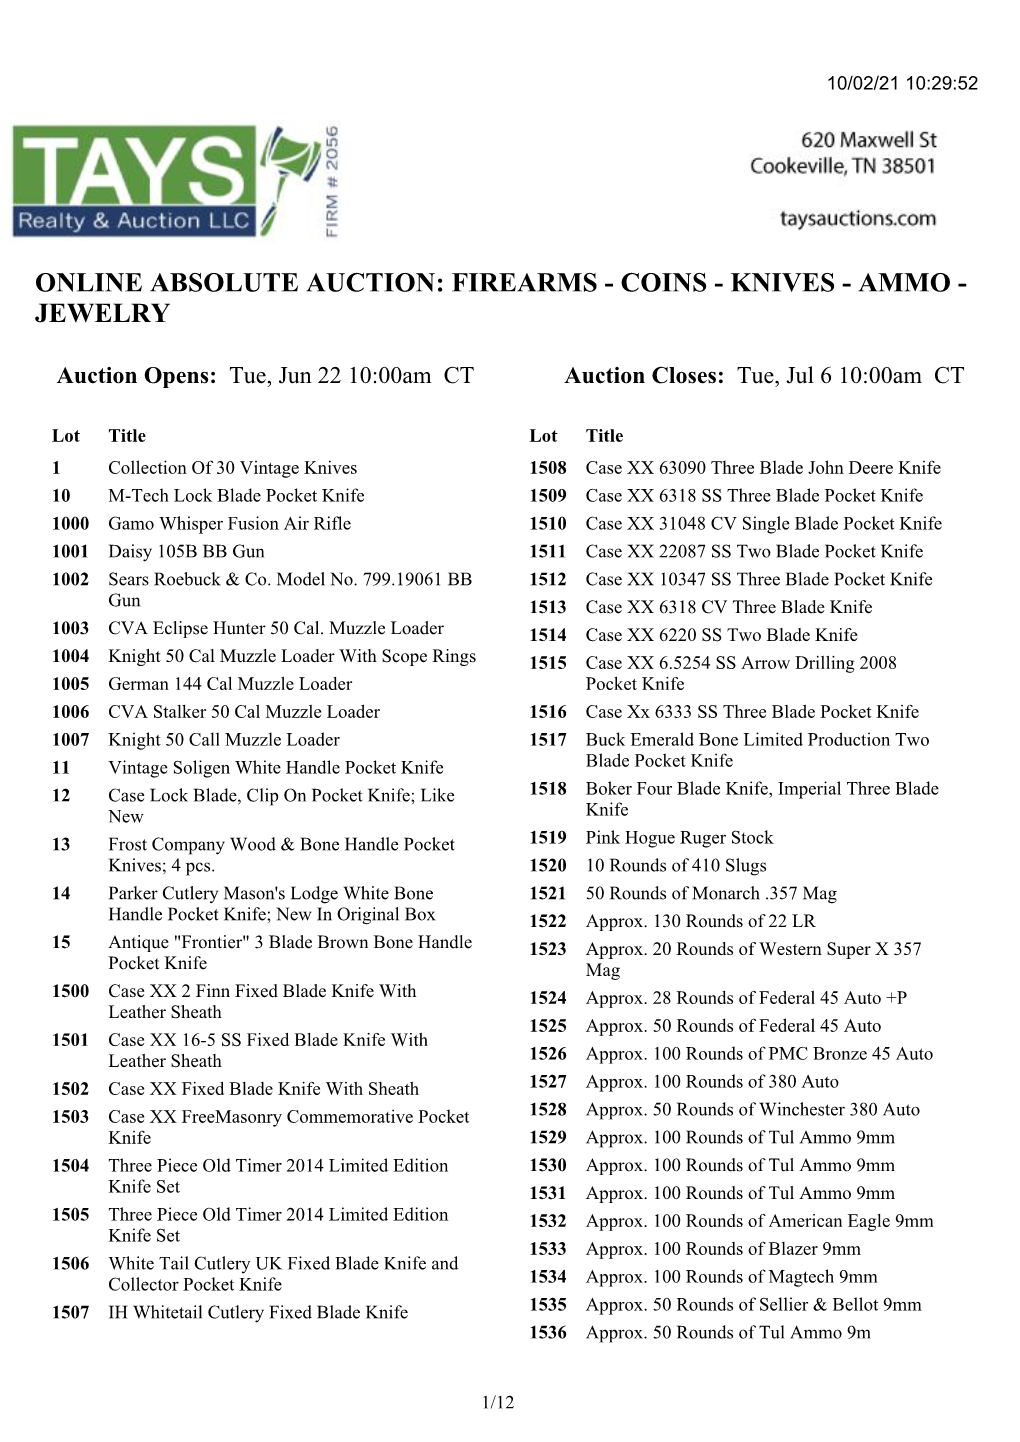 Online Absolute Auction: Firearms - Coins - Knives - Ammo - Jewelry